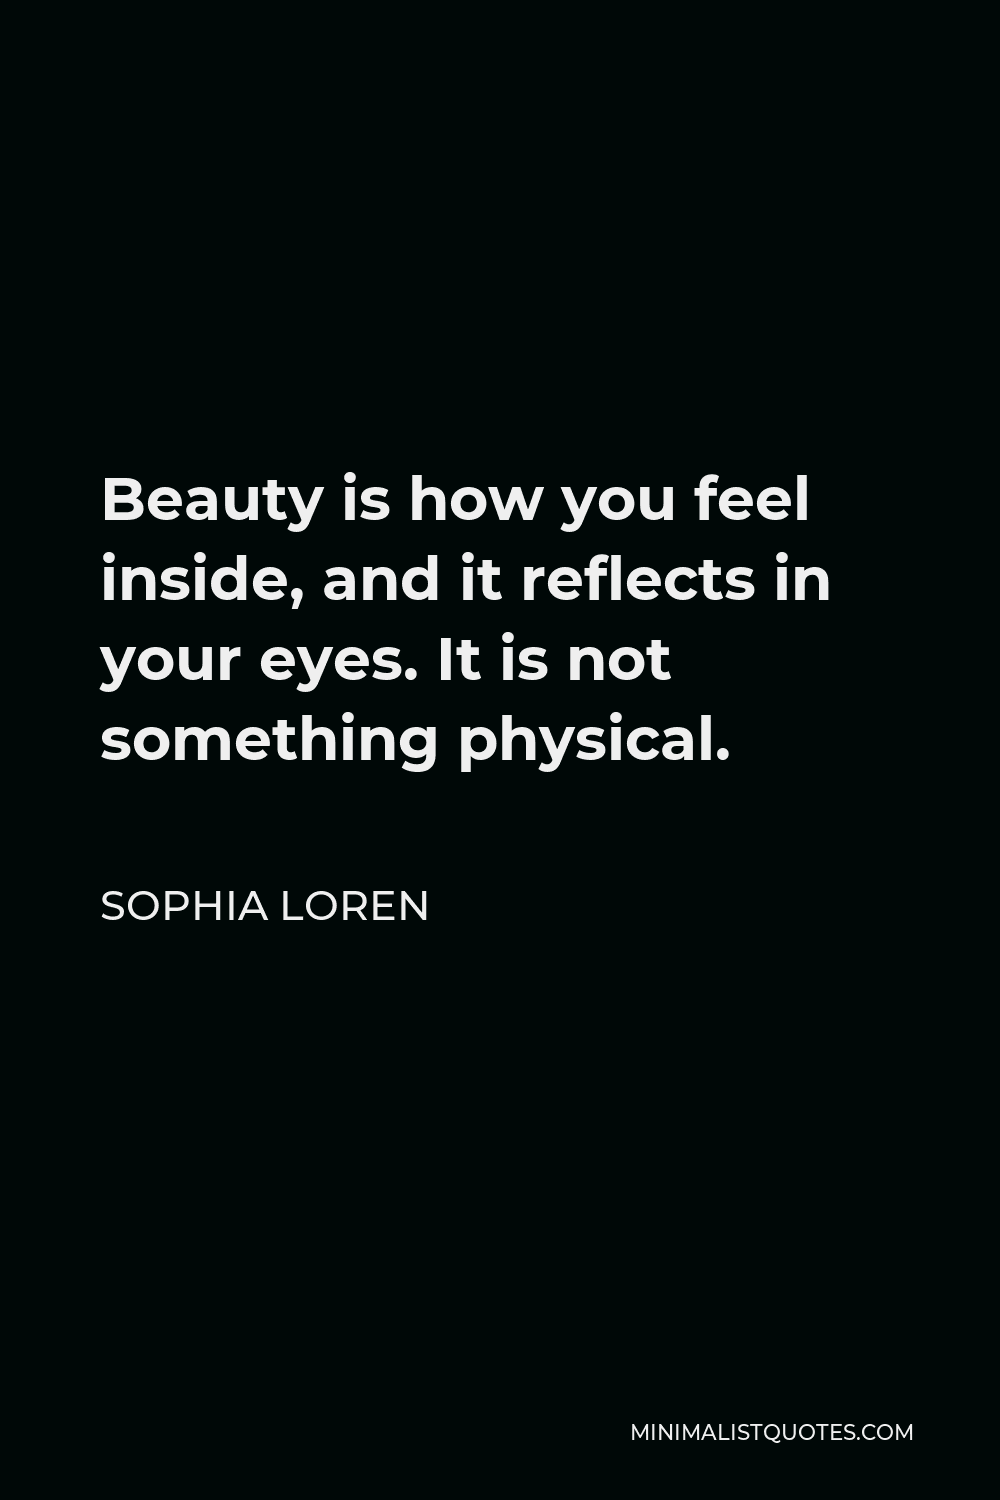 Sophia Loren Quote - Beauty is how you feel inside, and it reflects in your eyes. It is not something physical.